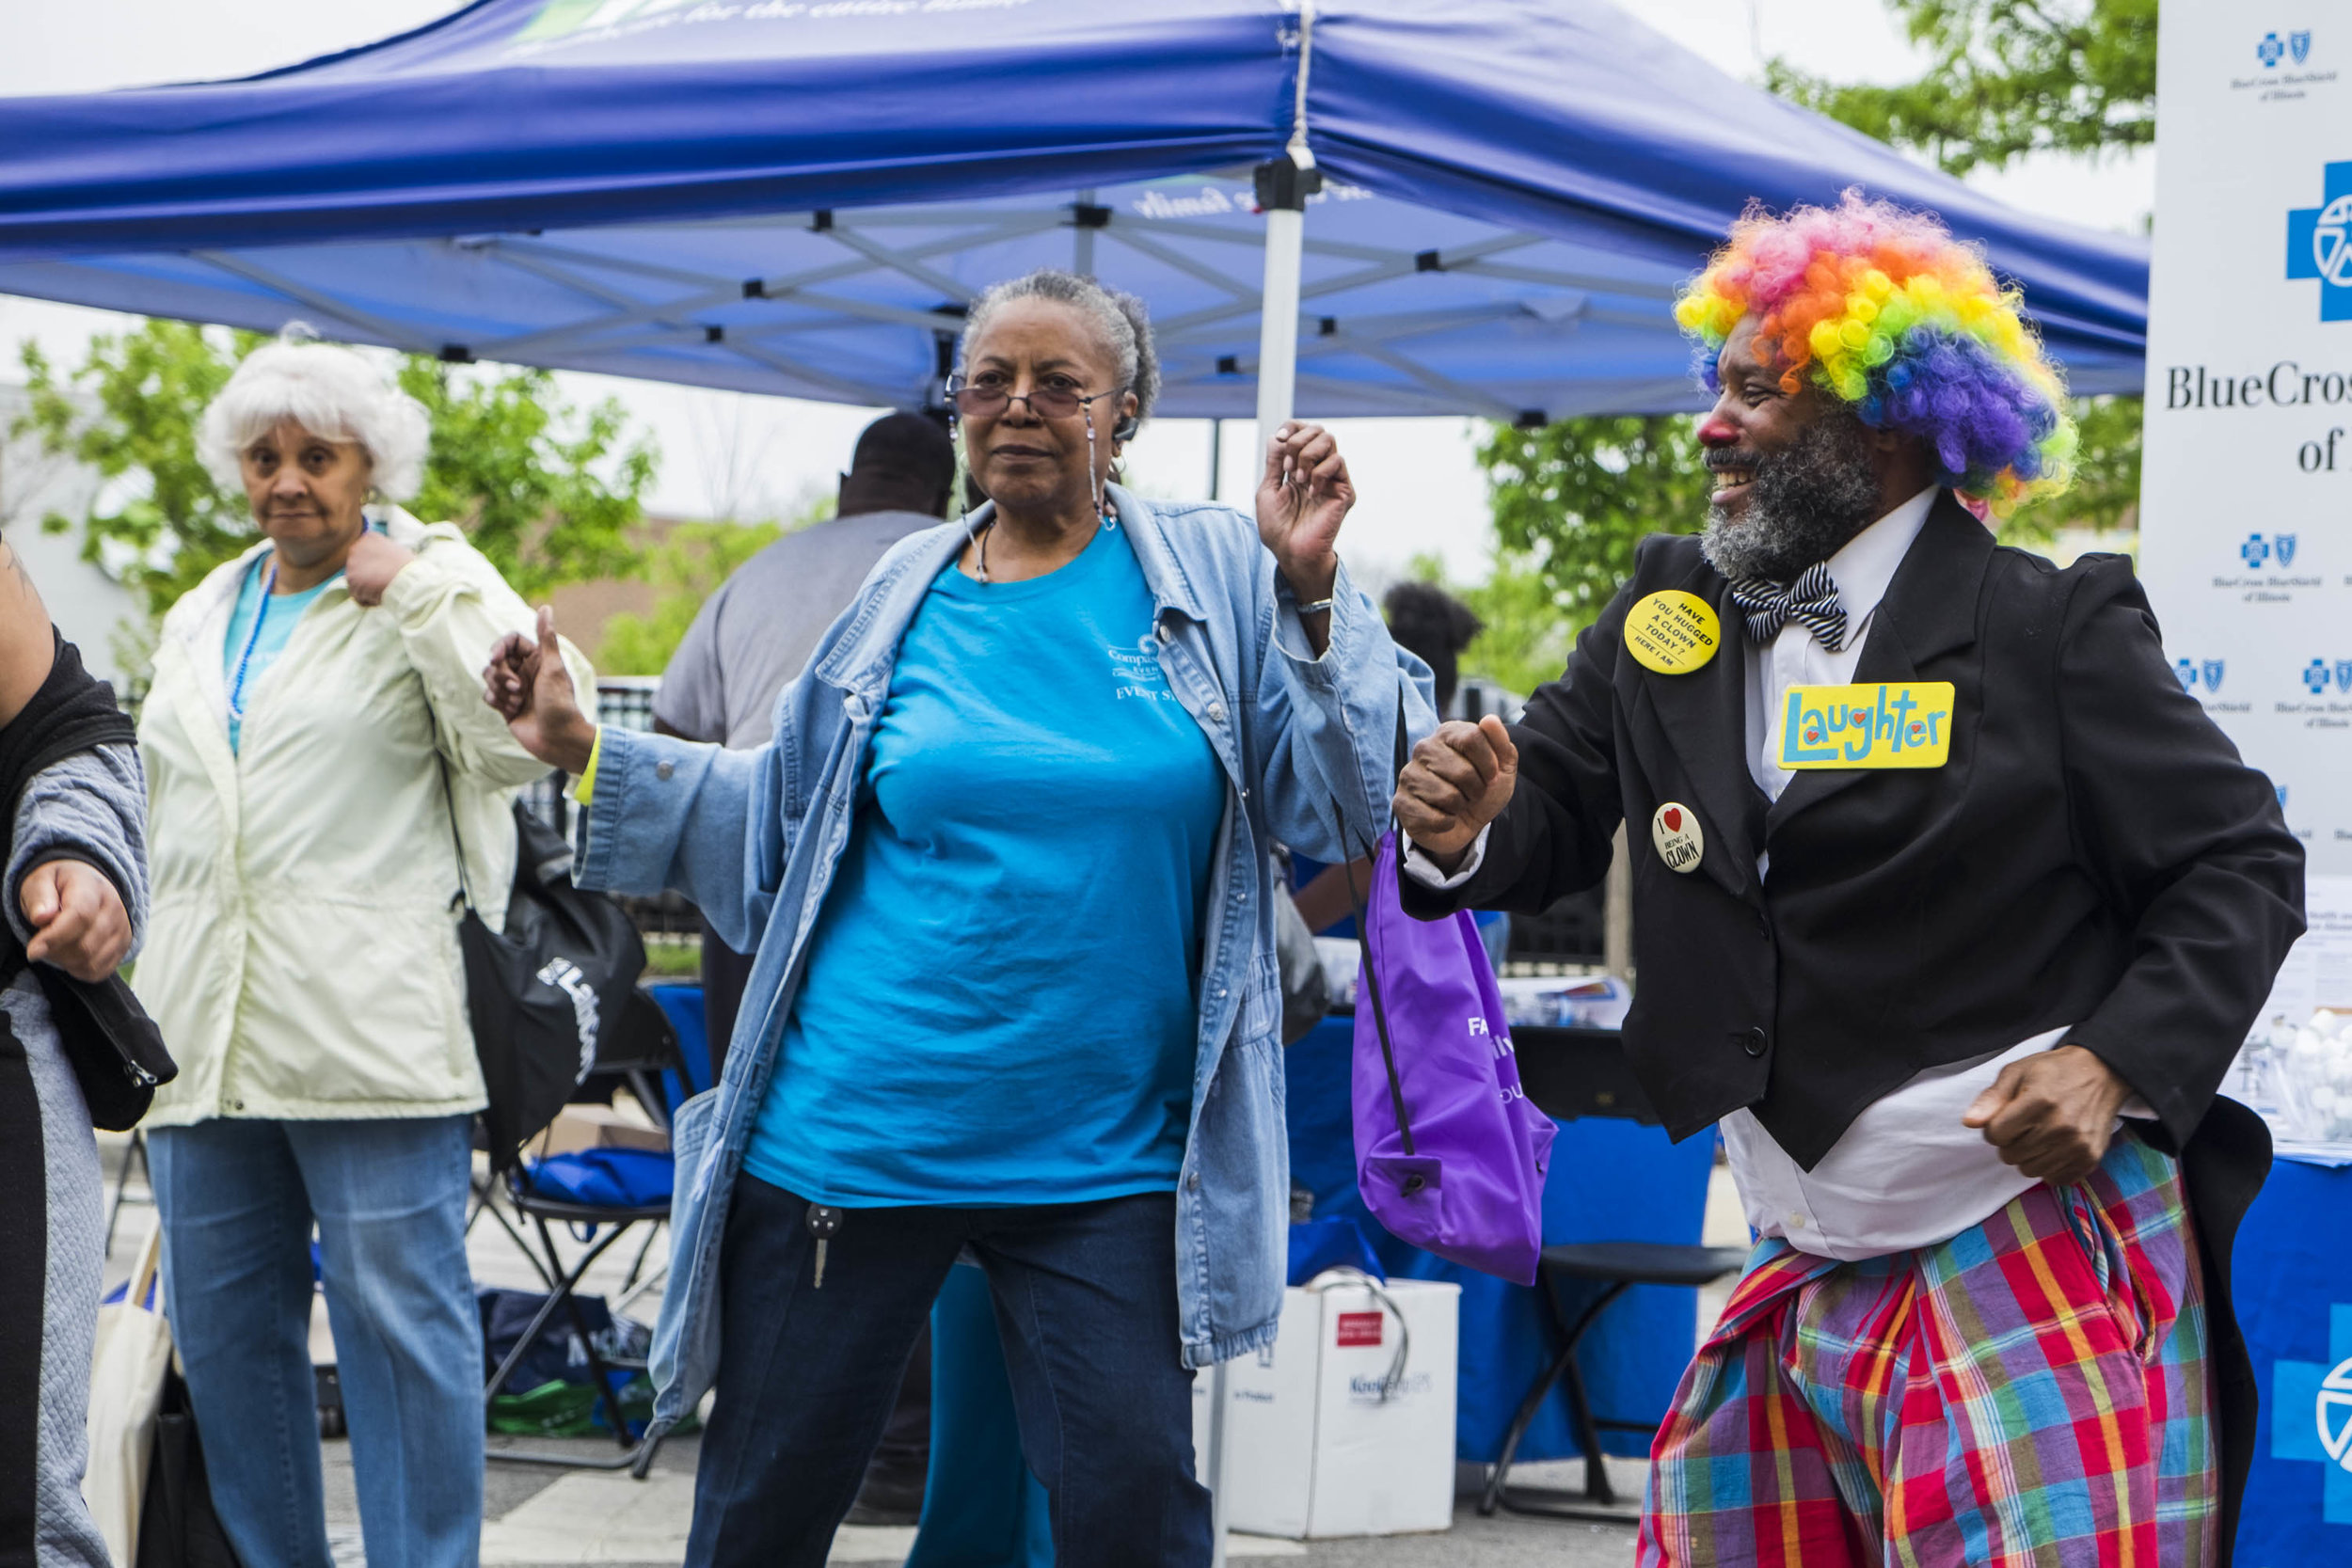  Antonio Sanders, a member of the Senior Clown Troupe, dances with older adults during the Englewood Exclusively Us Senior’s Day Celebration. Sanders and the Senior Clown Troupe performs for older adults in nursing homes and retirement centers. “Clow